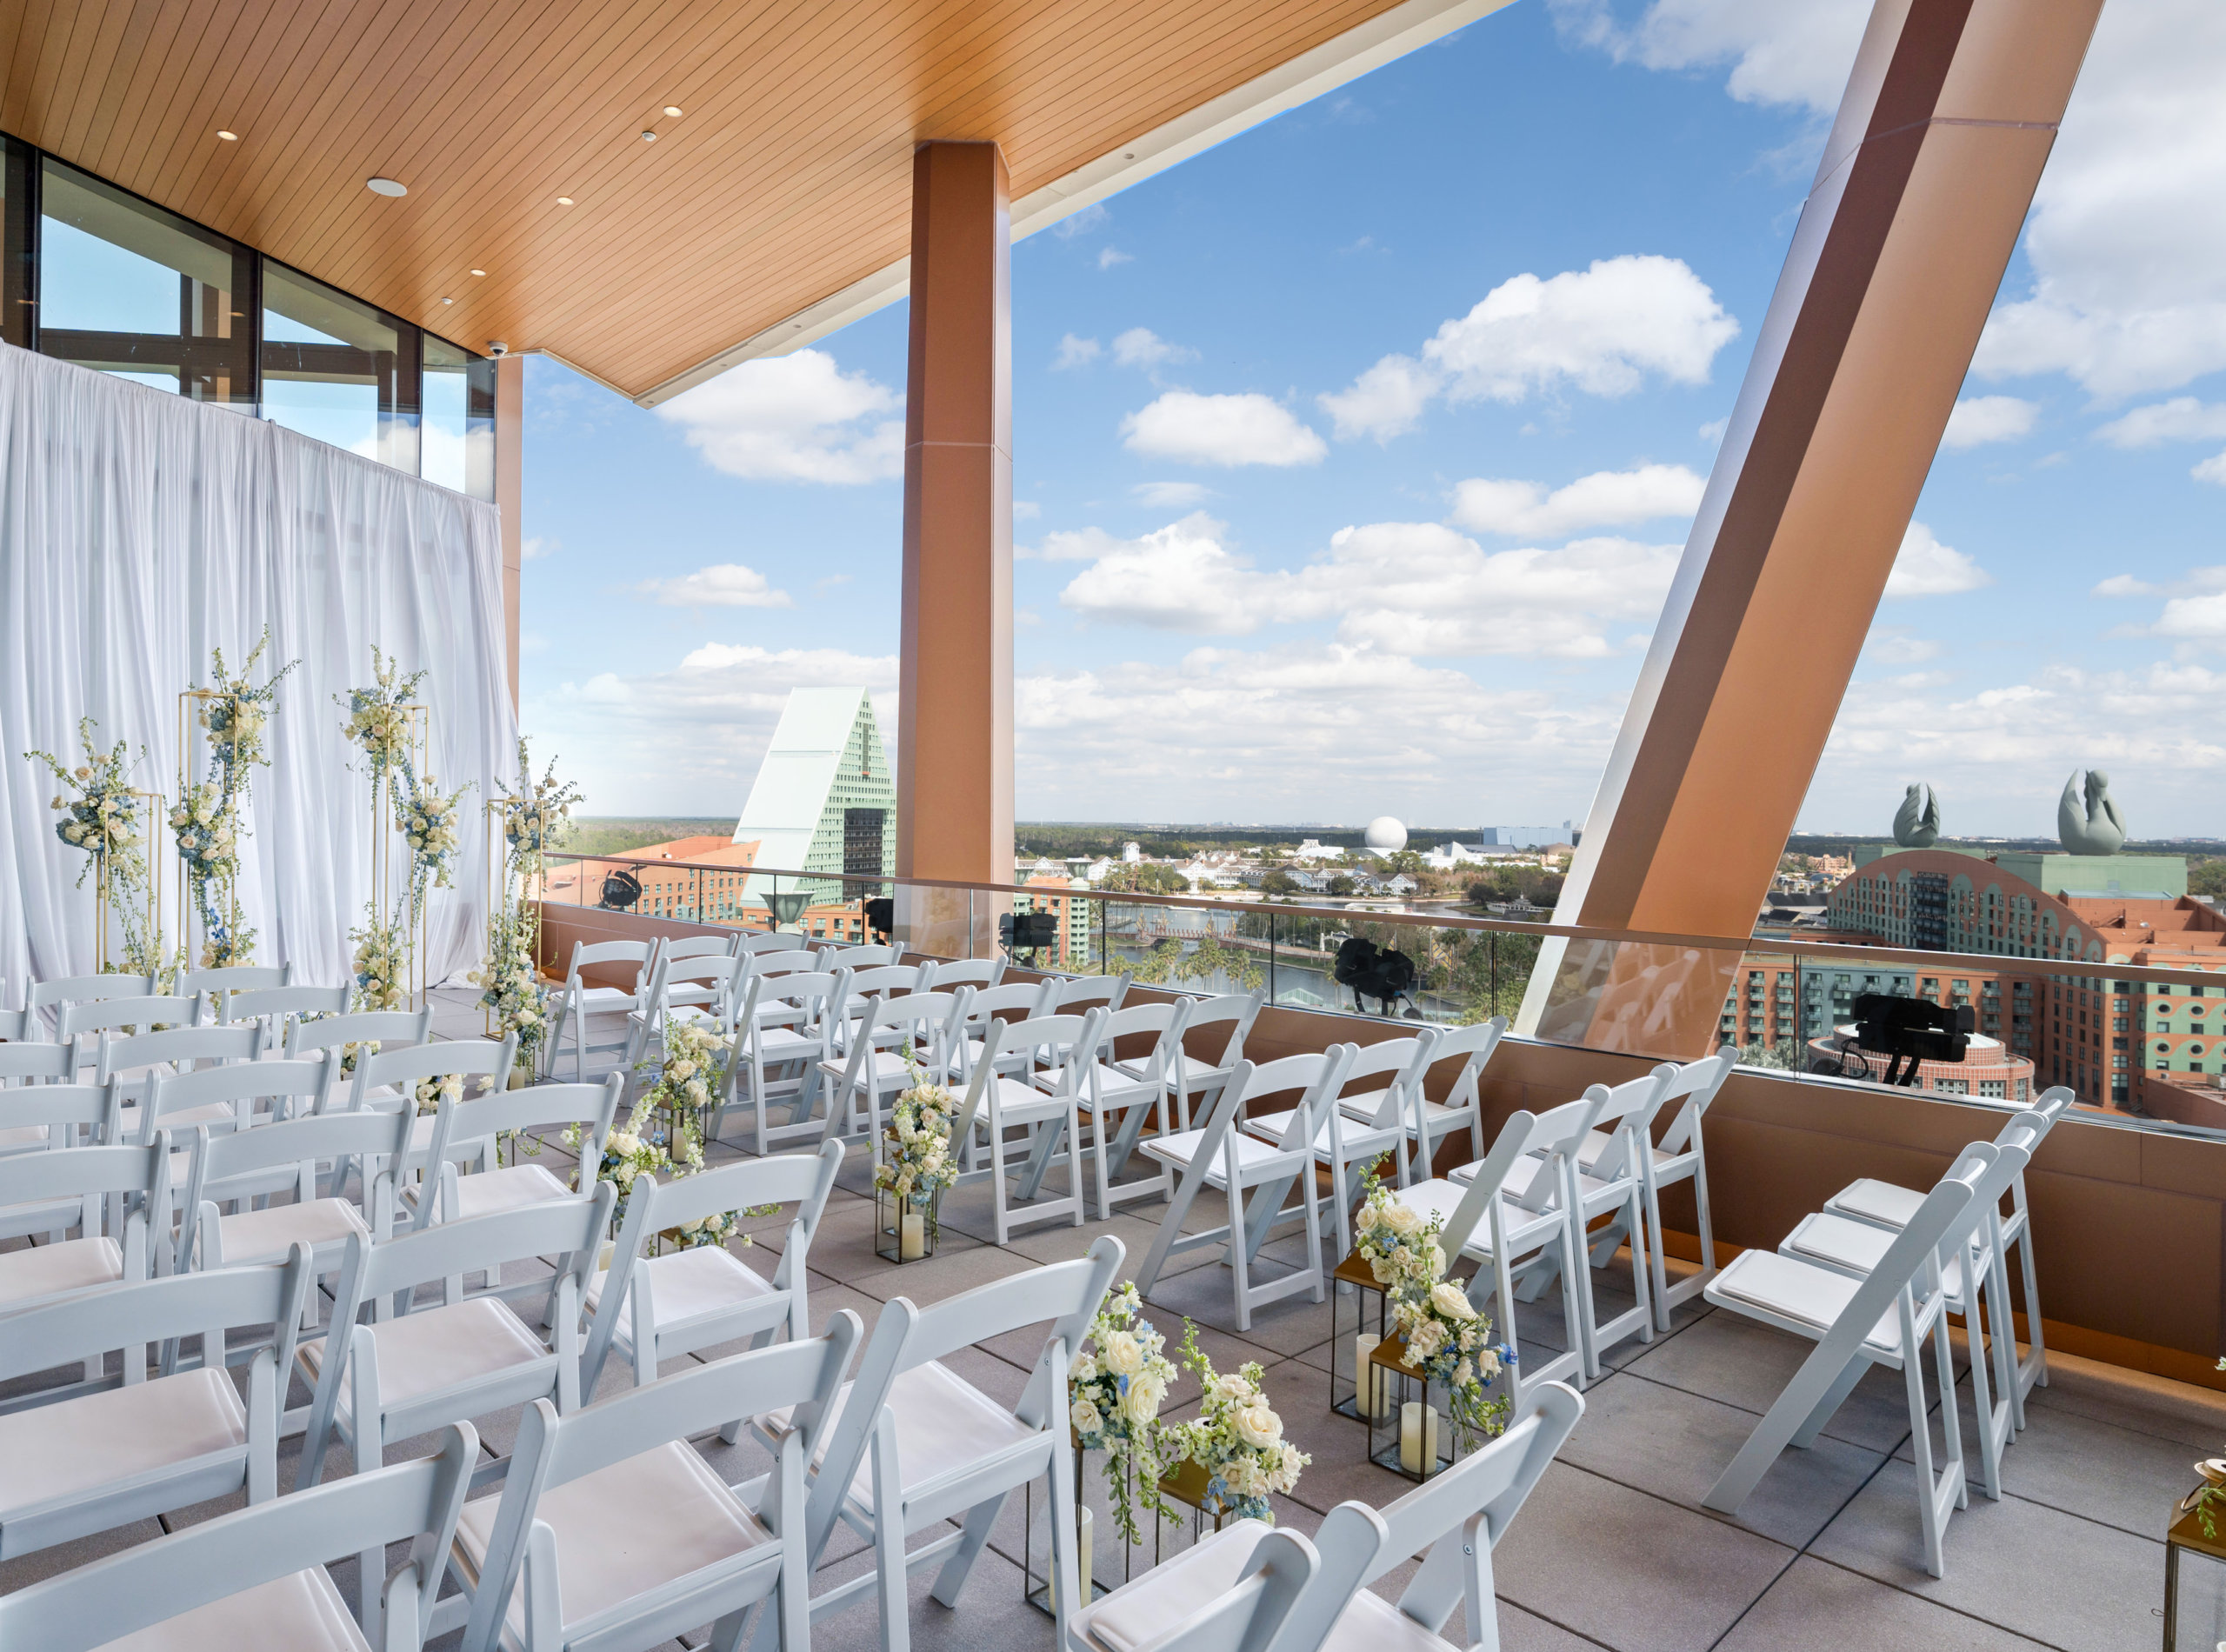 Wedding Ceremony Set-Up at the Vue Terrace on on the Rooftop of the Walt Disney World Swan Reserve